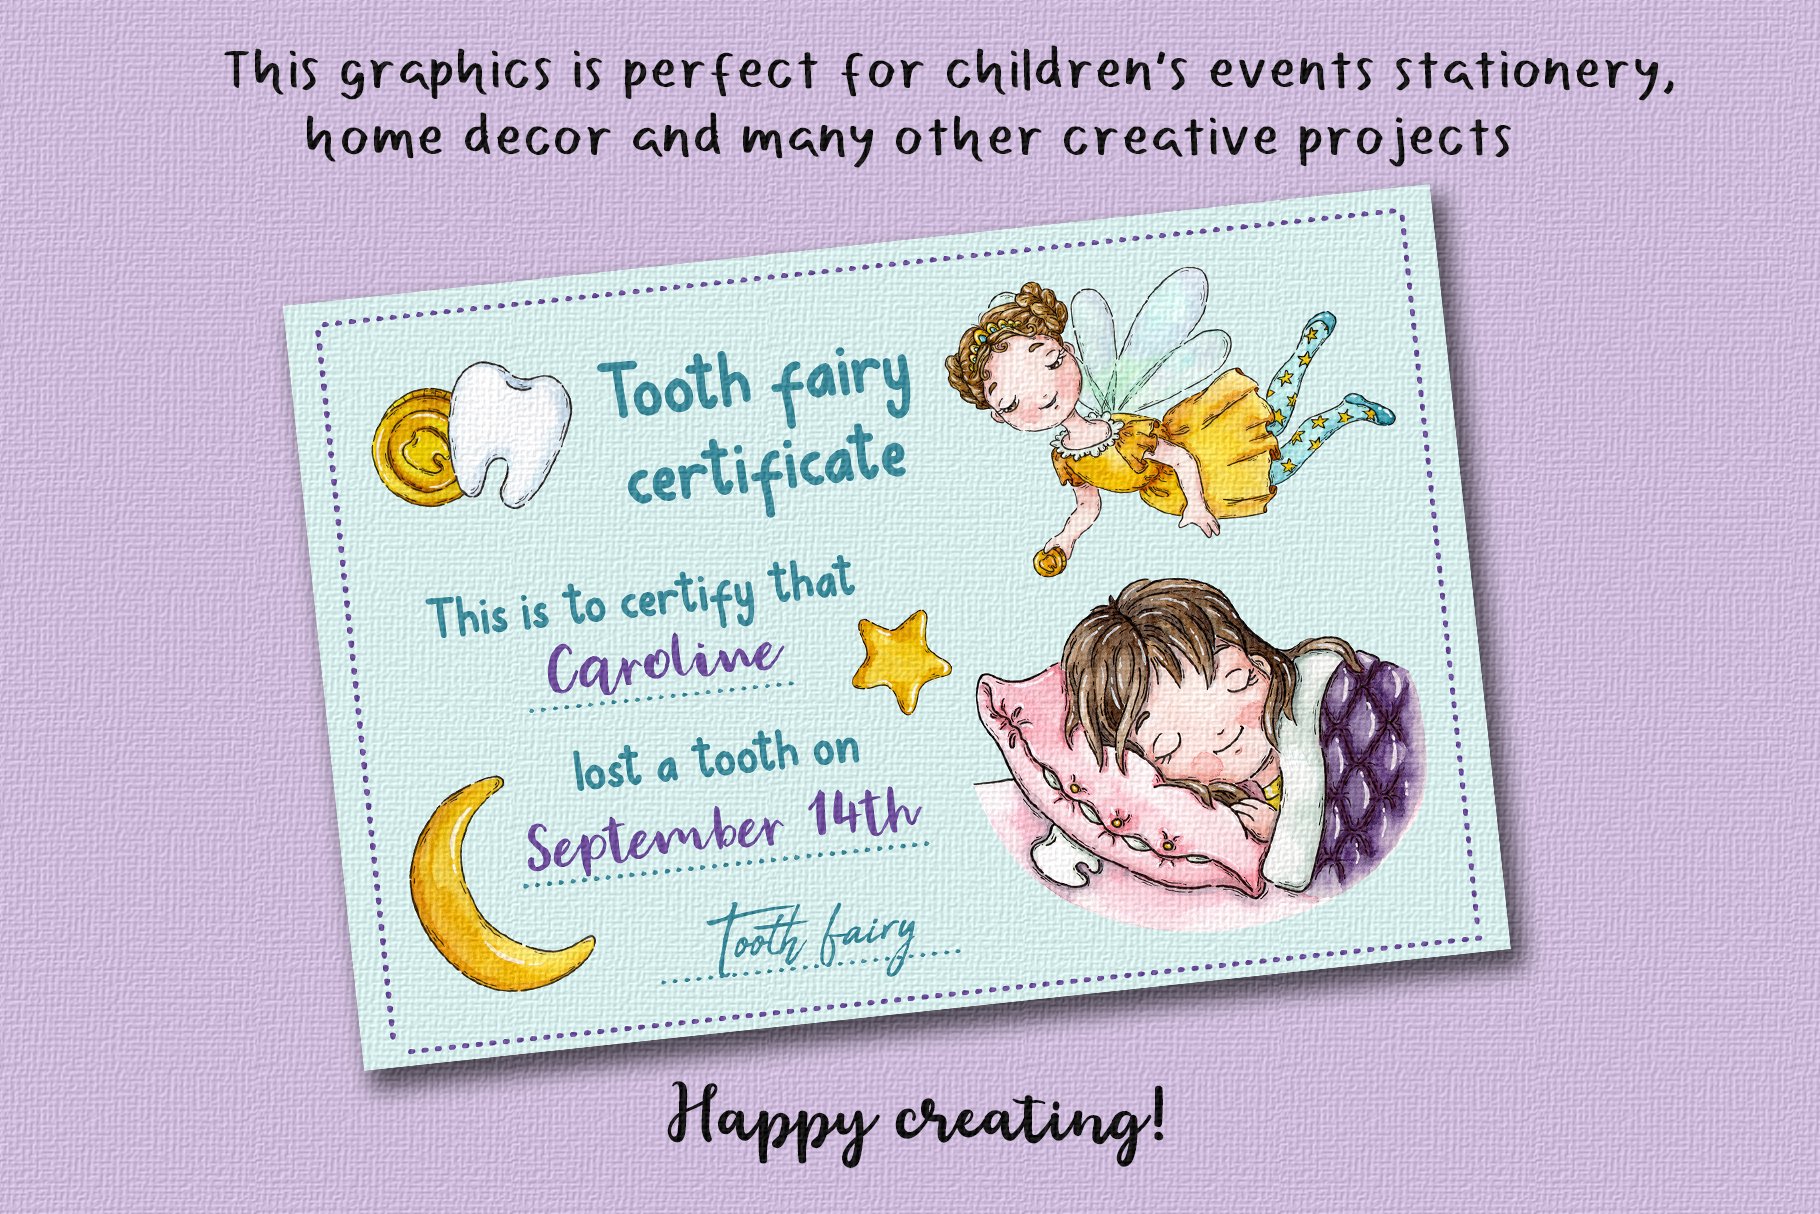 Delicate postcard for kids from a tooth fairy.